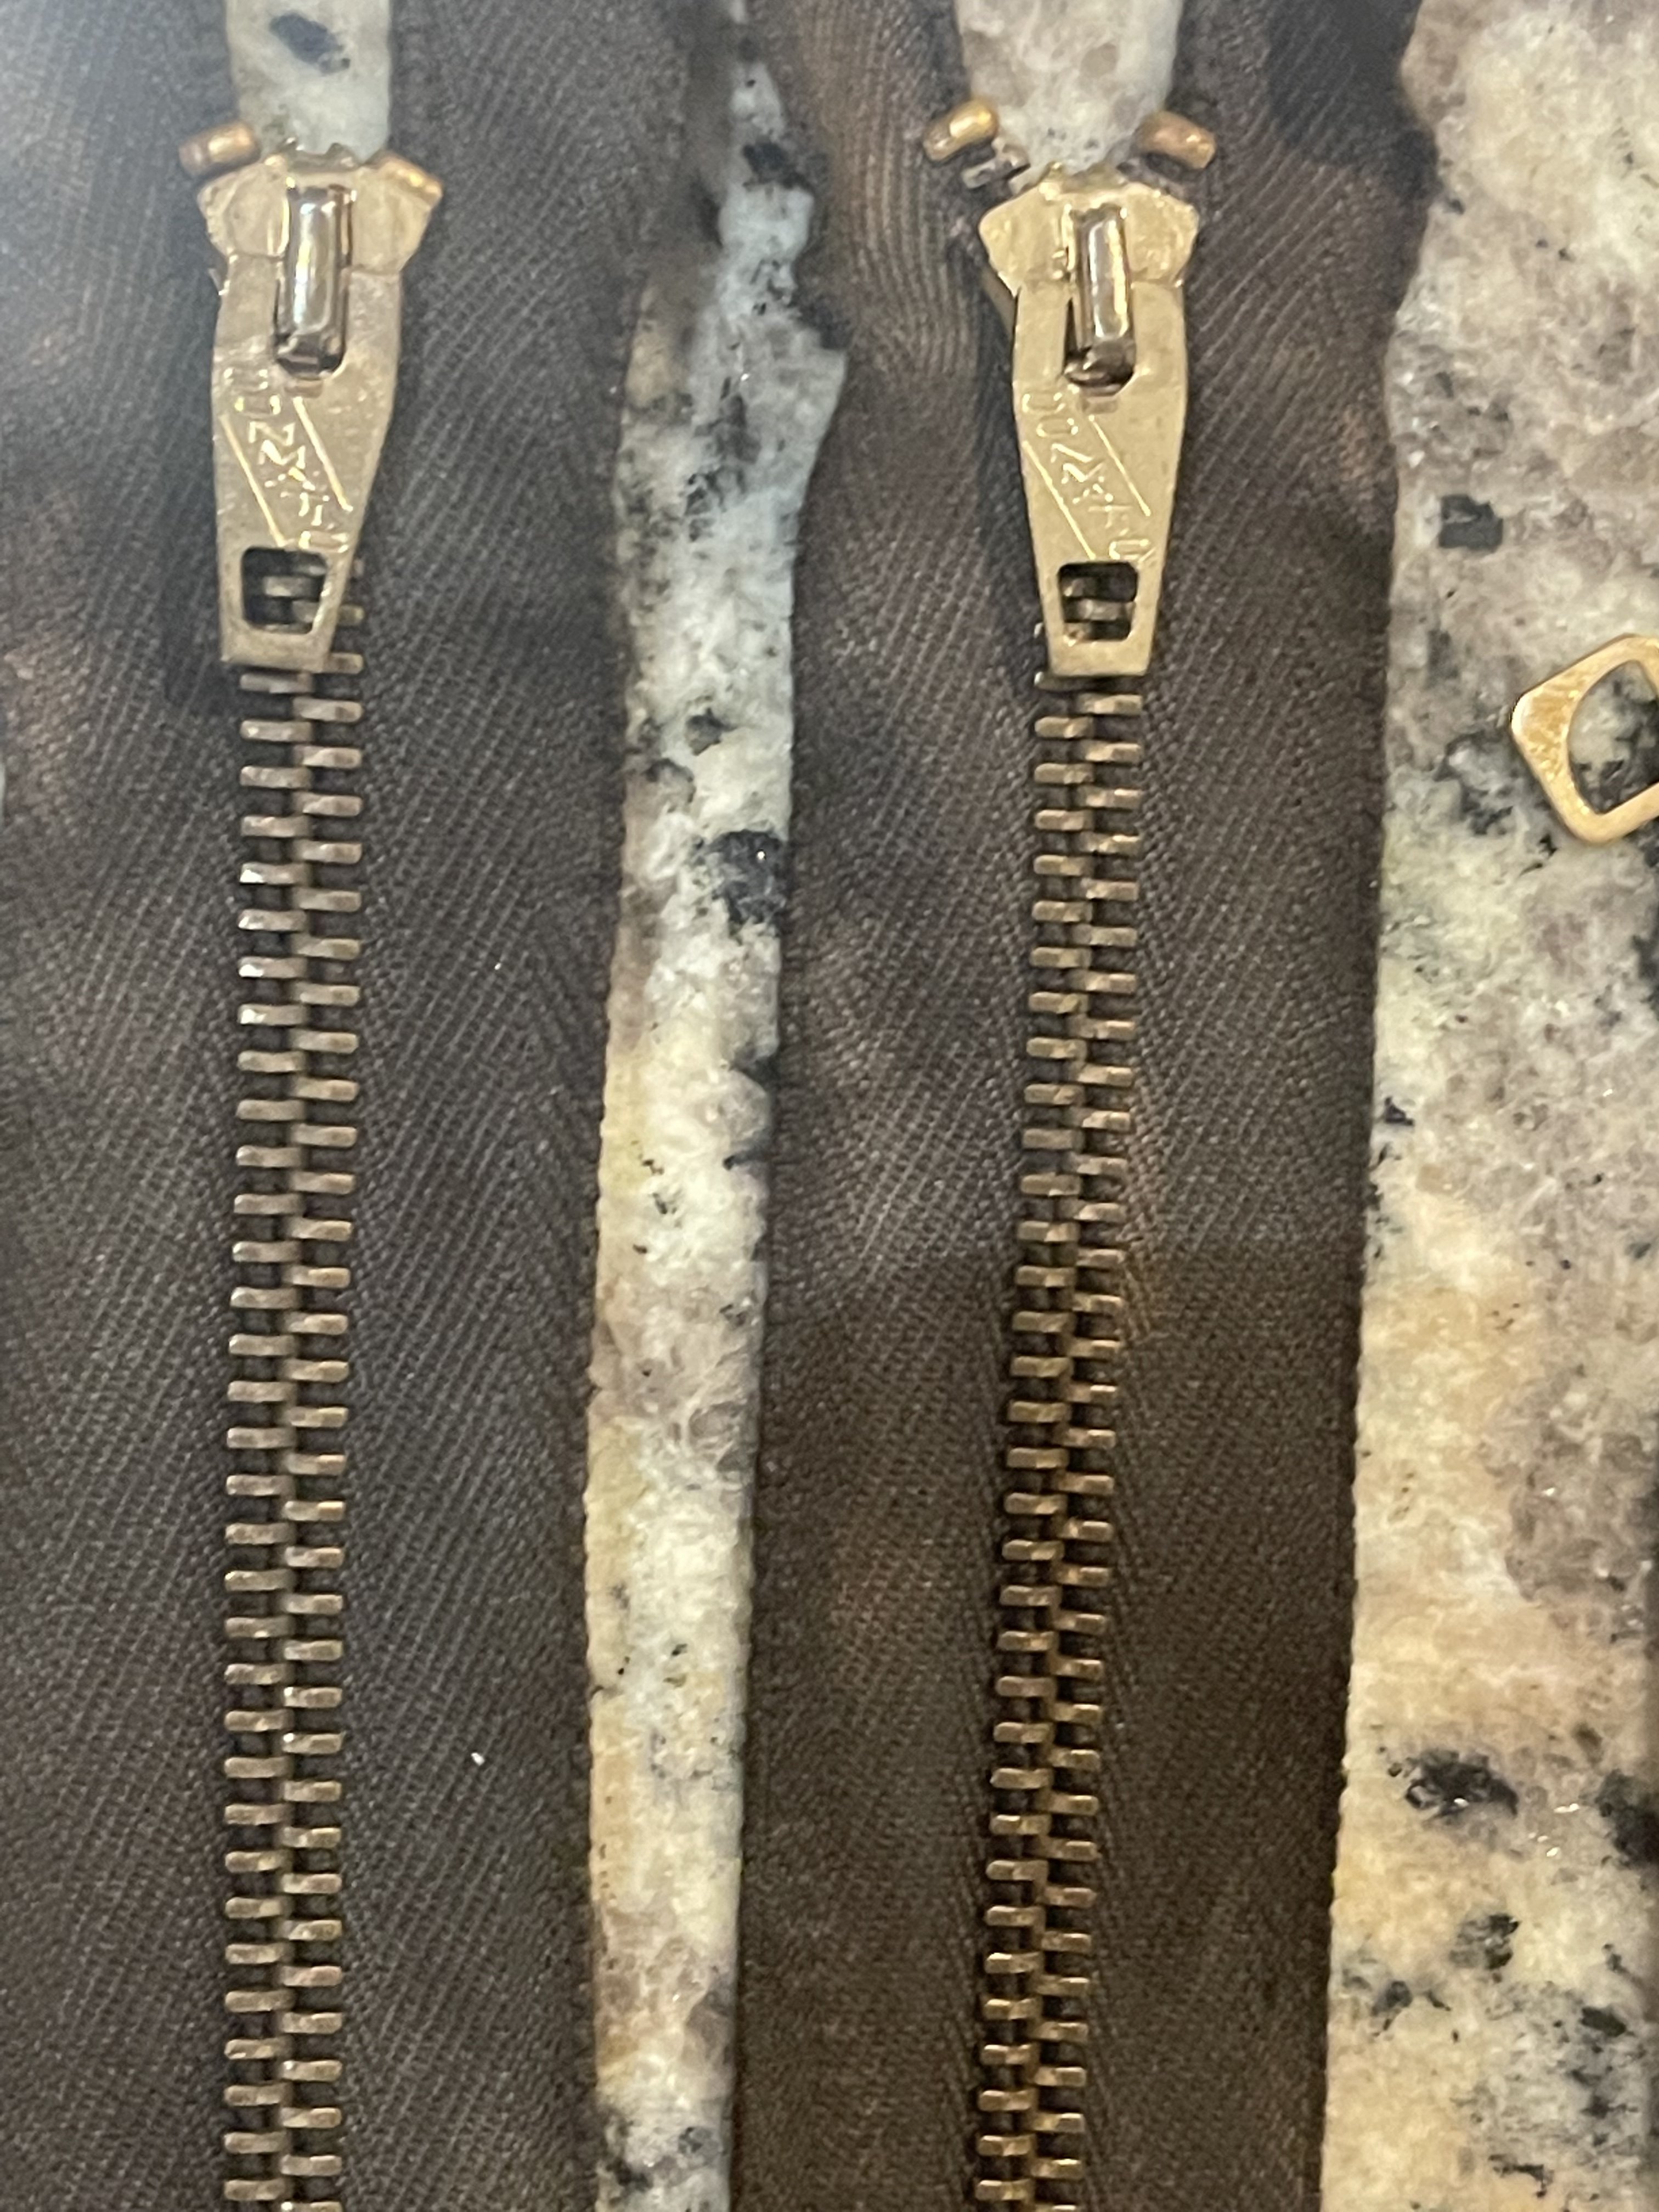 Anyone know how old this Talon zipper is? : r/vintage